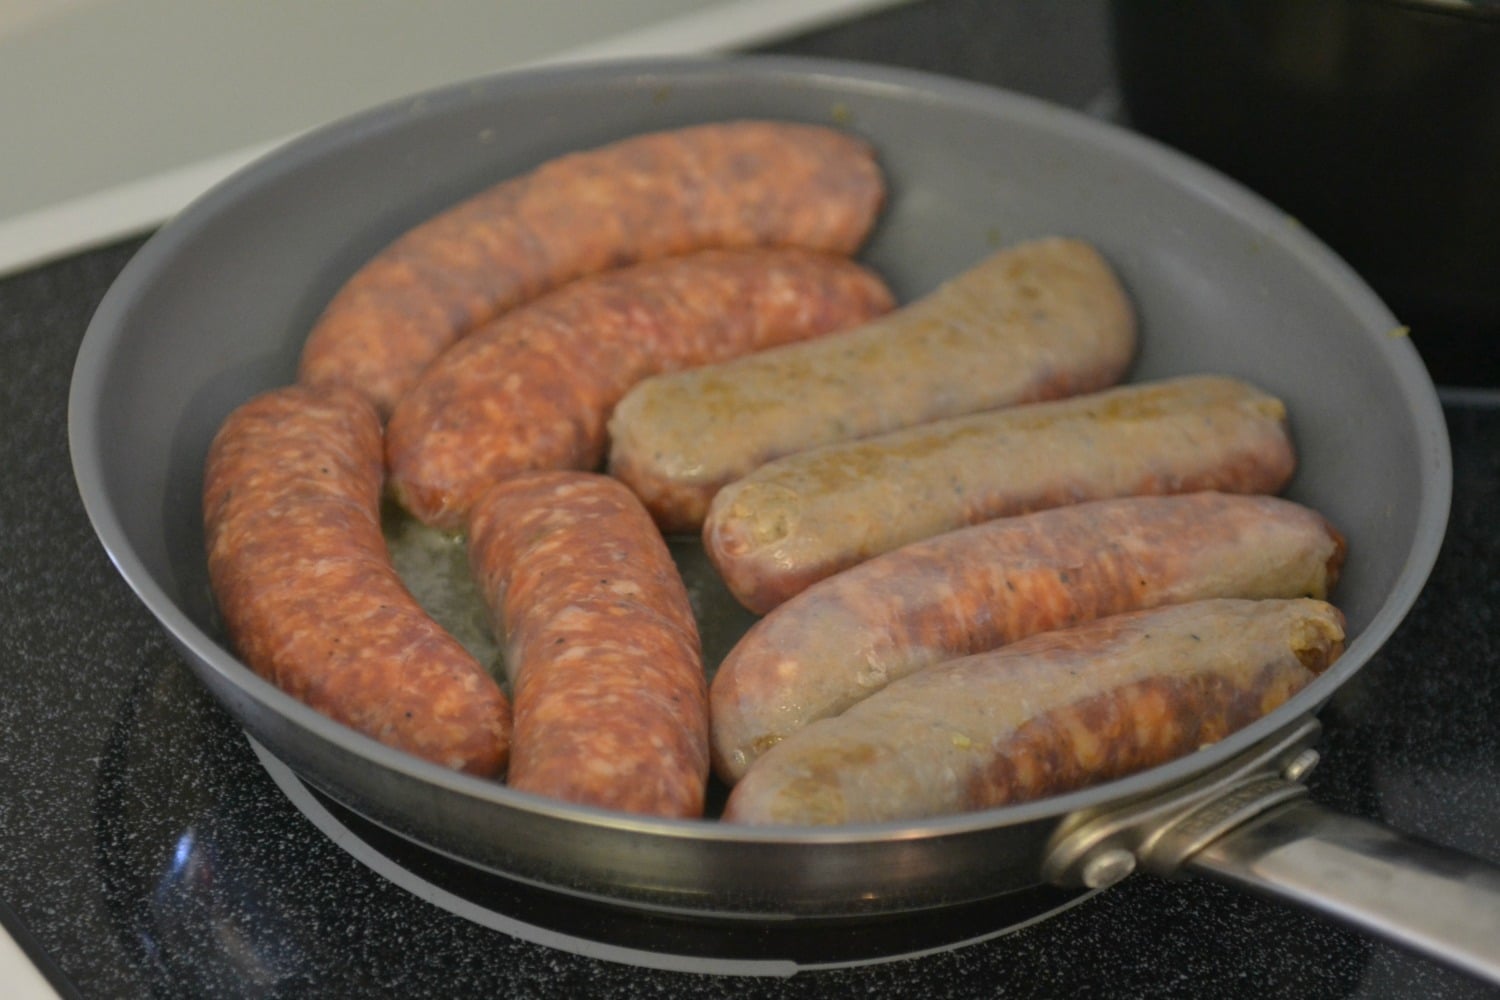 Brown the Italian sausages in a frying pan.